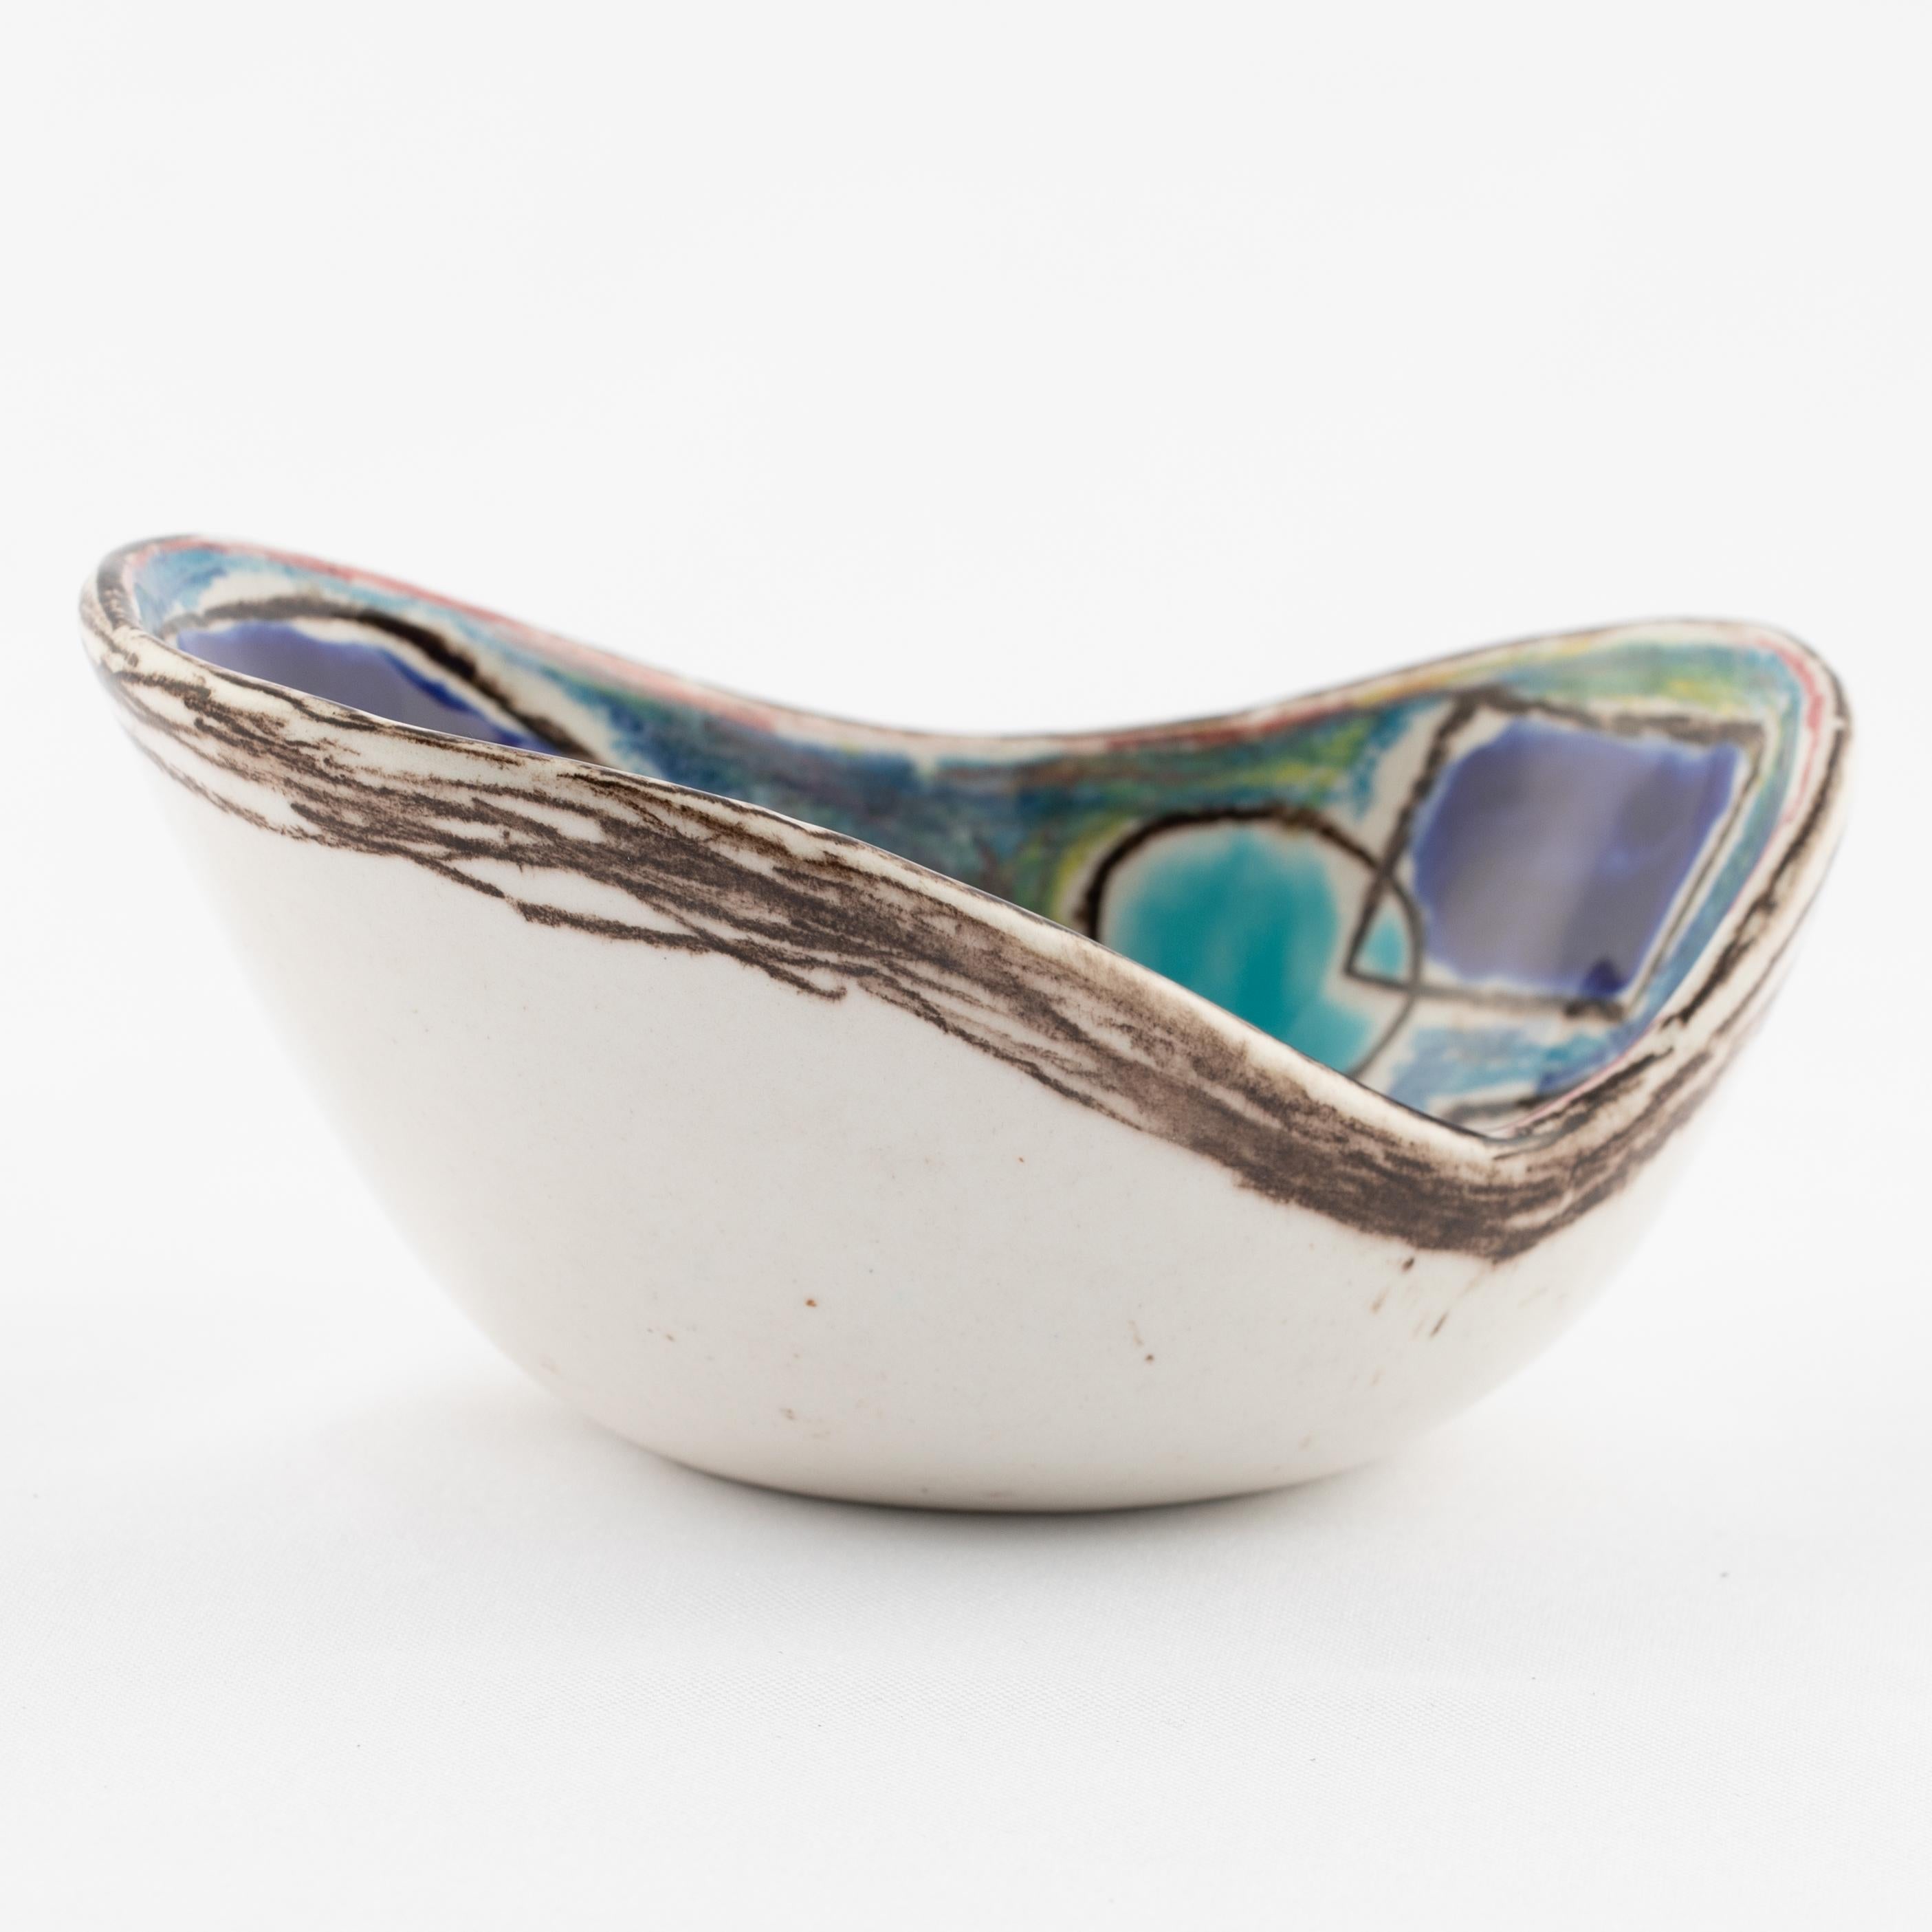 Marcello Fantoni Ceramic Bowl with Abstract Design, circa 1960s In Good Condition For Sale In Brooklyn, NY